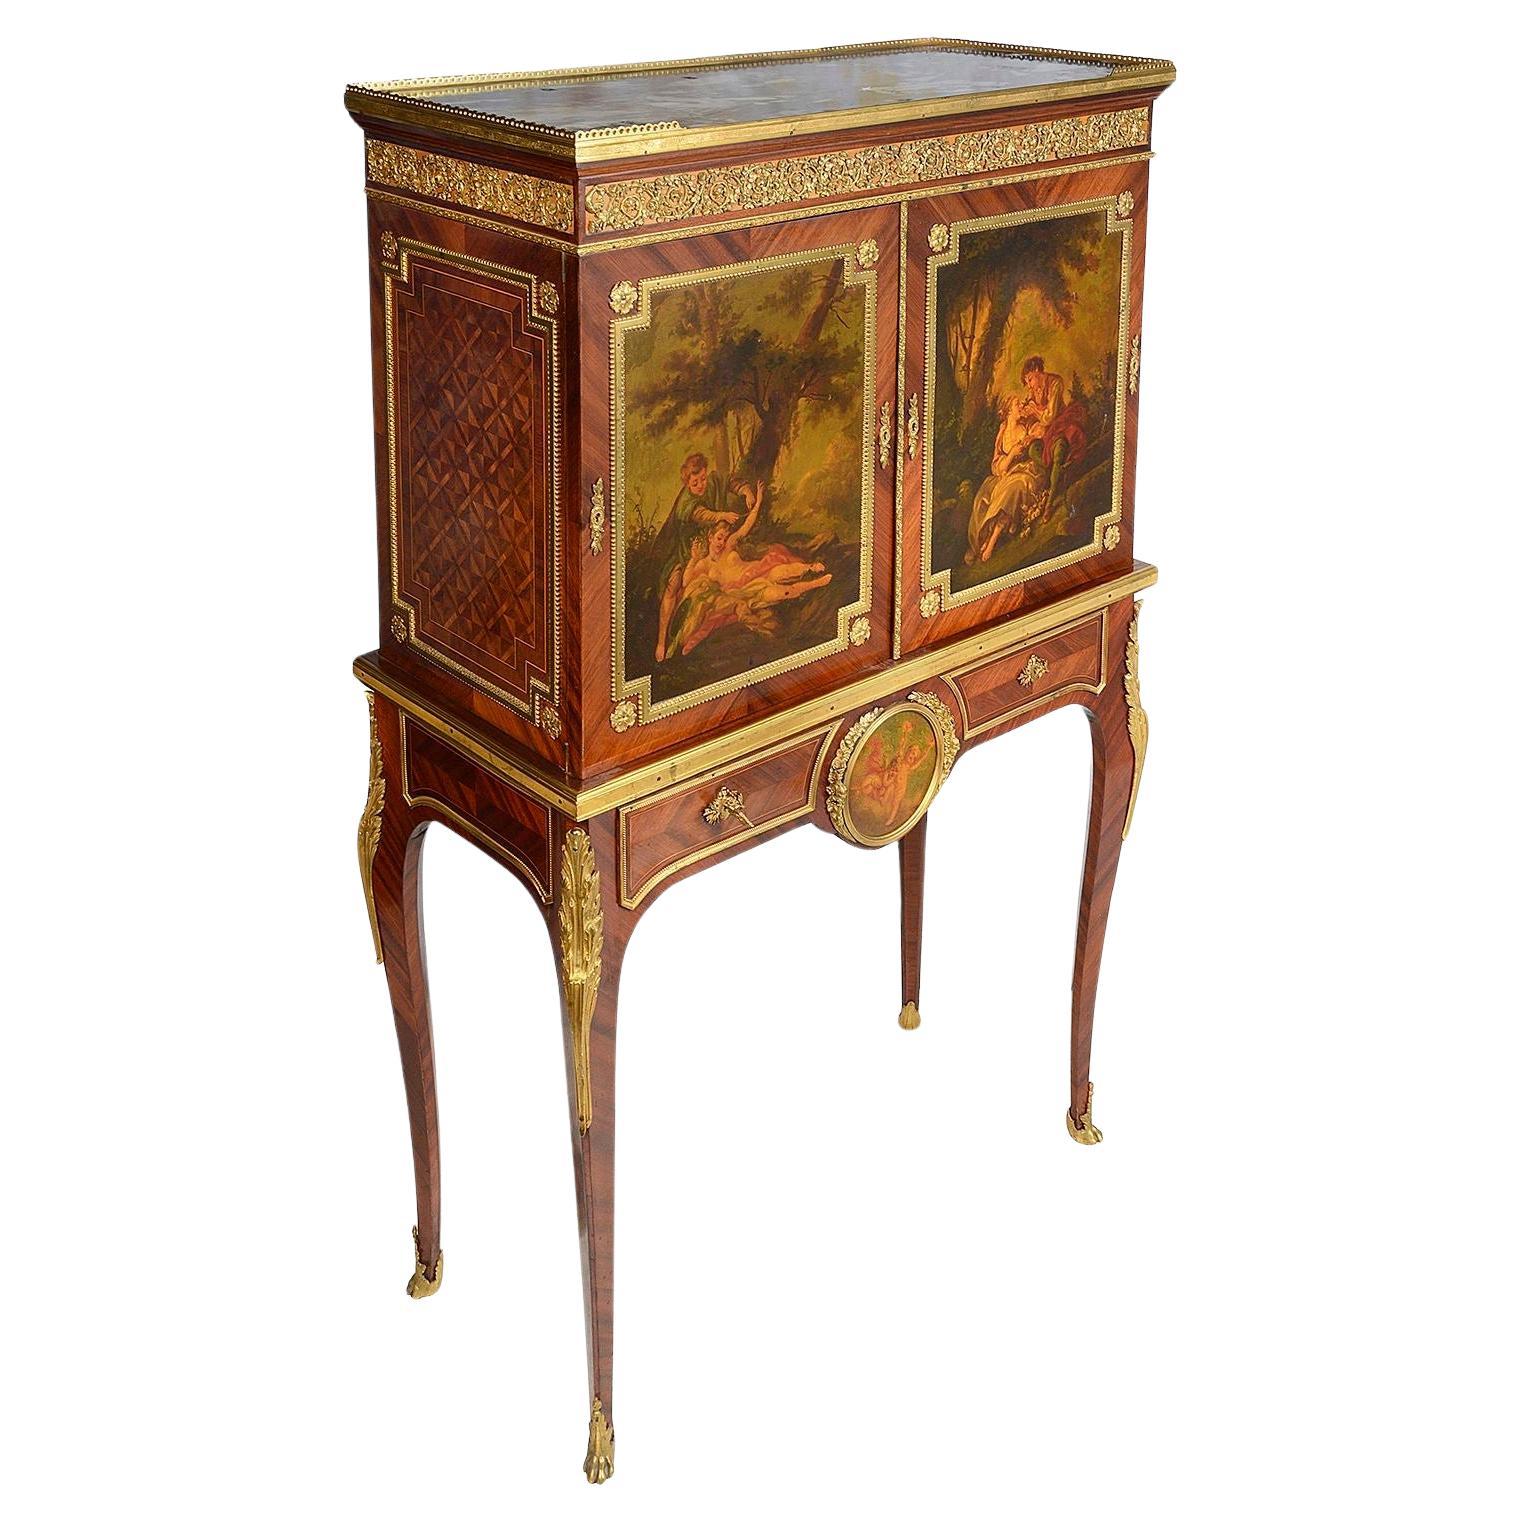 Side cabinet on stand, by Paul Somani, 19th Century.